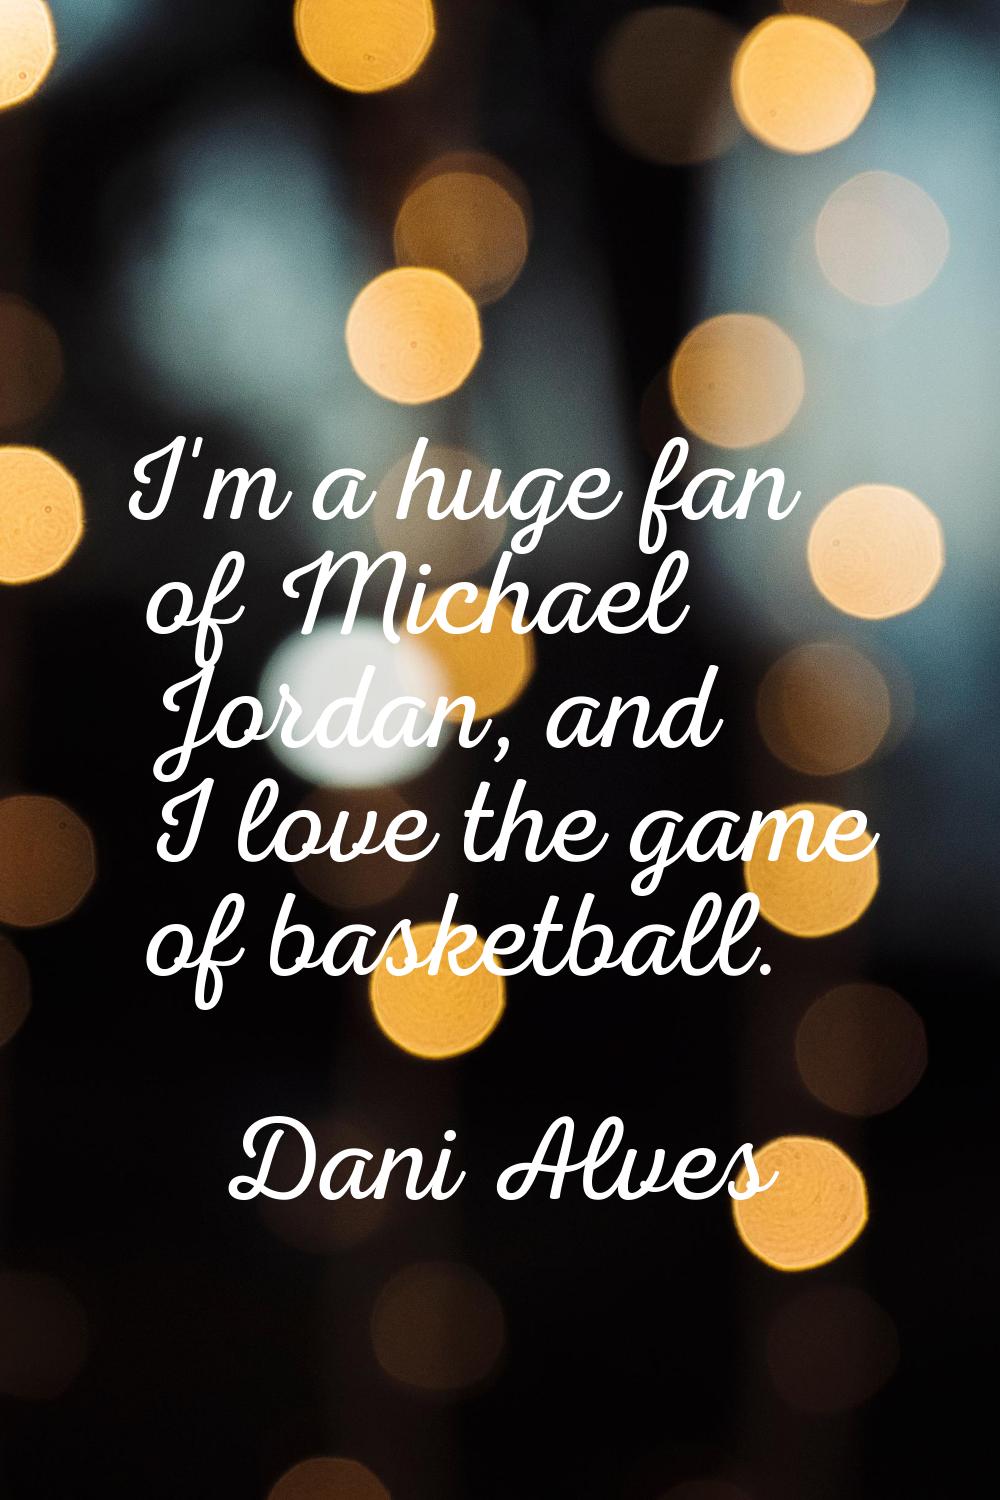 I'm a huge fan of Michael Jordan, and I love the game of basketball.